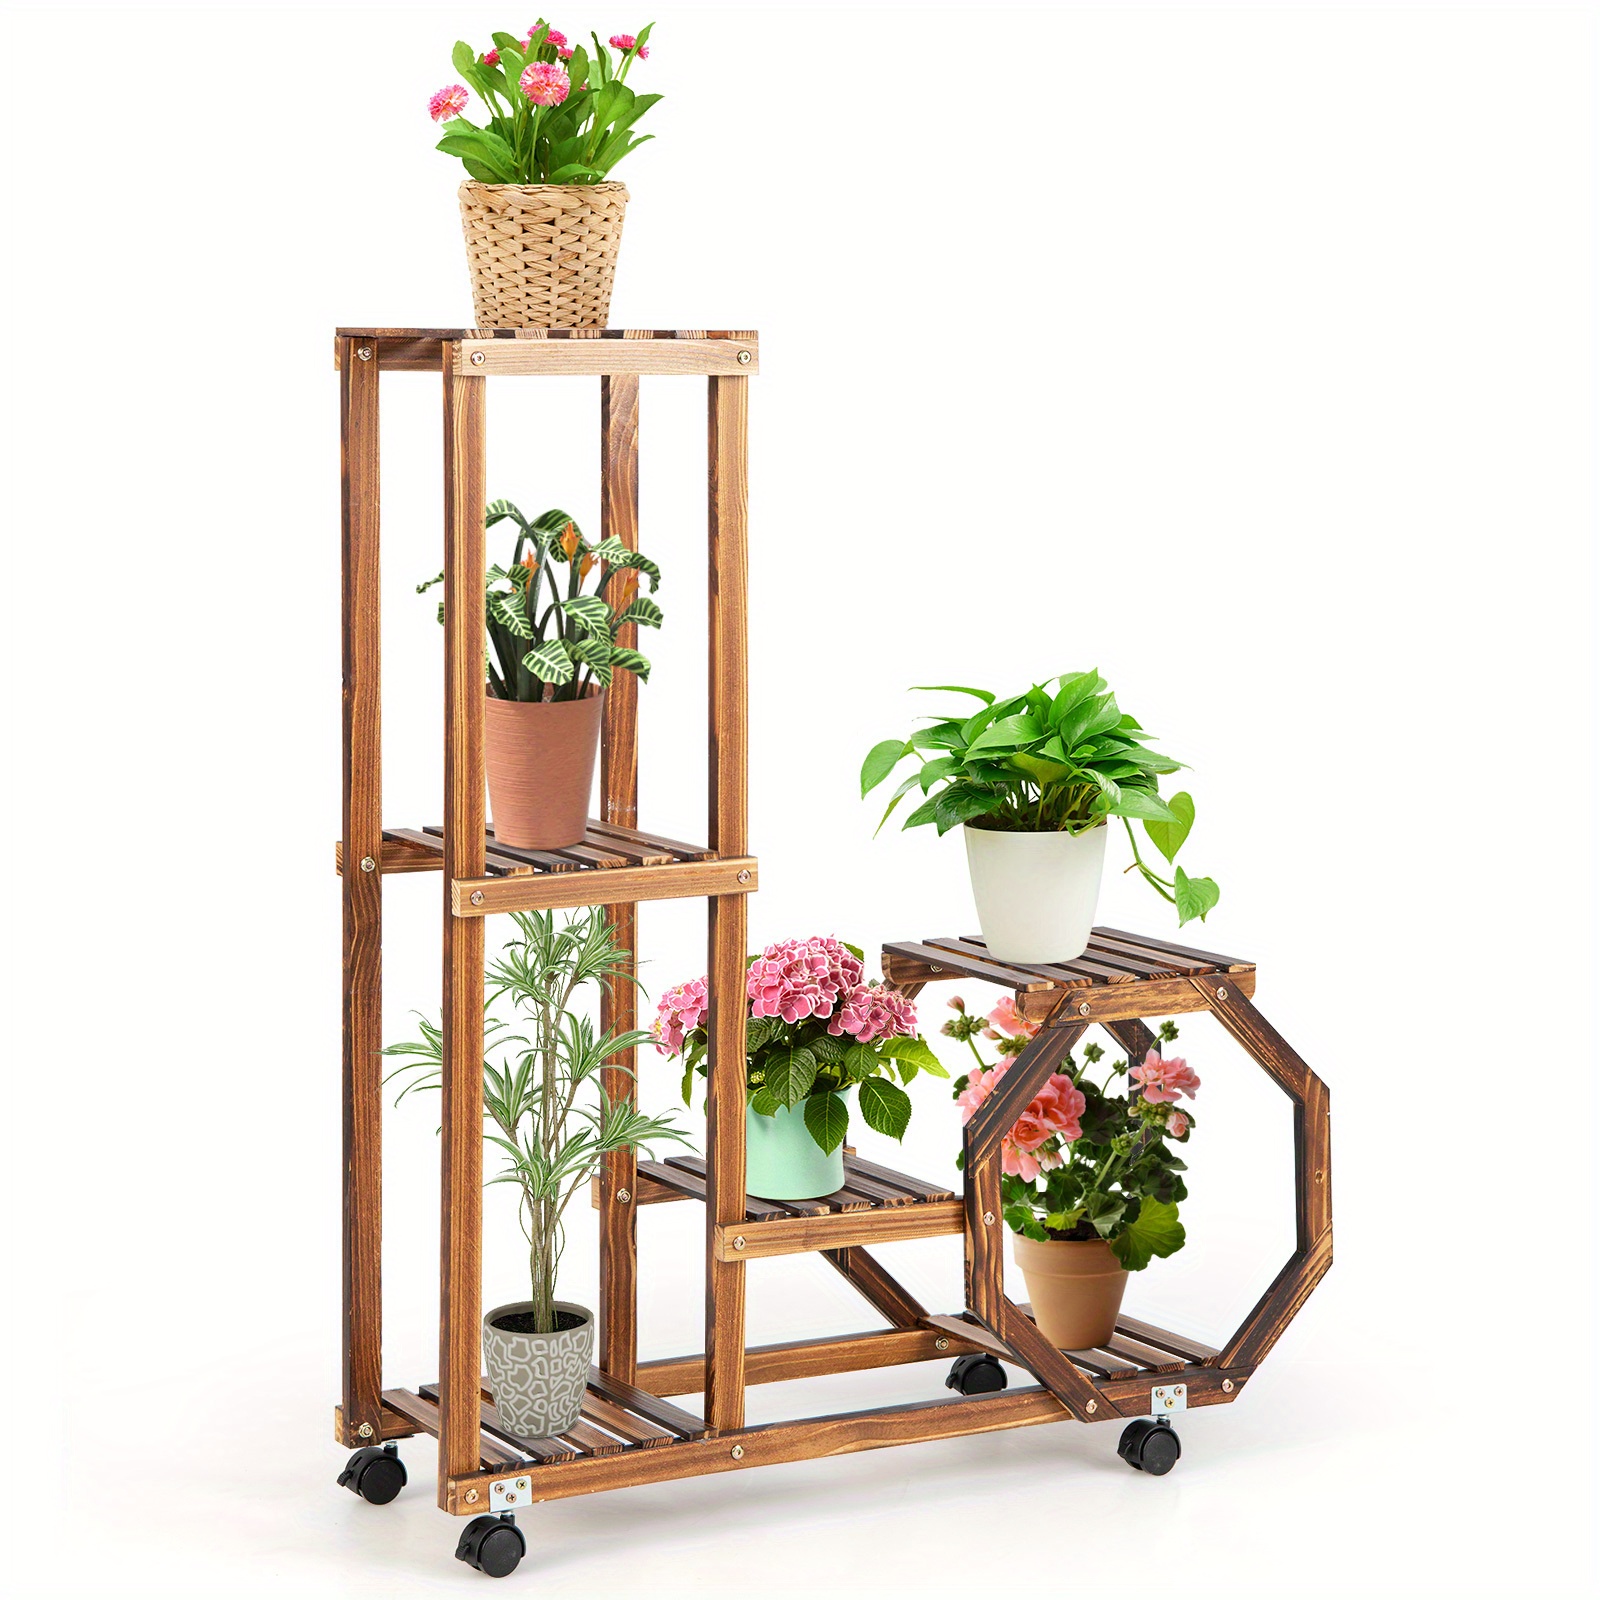 

Costway 6-tier 6 Potted Rolling Plant Stand Wooden Storage Display Shelf Rack W/wheels